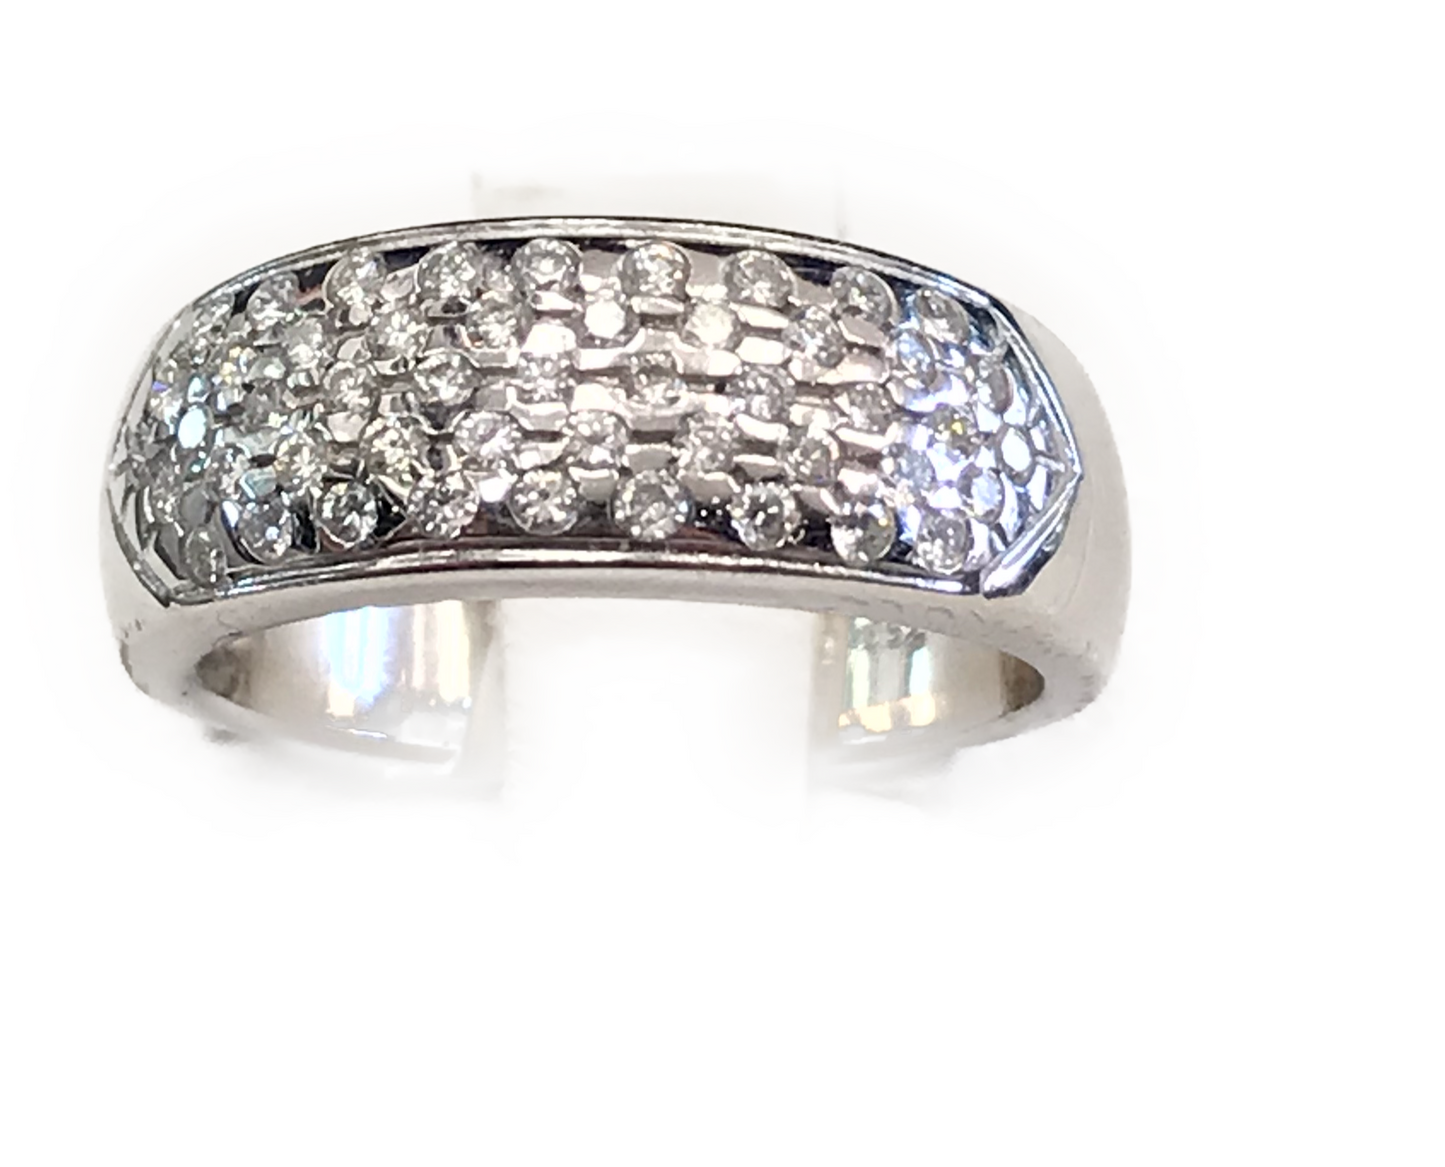 18Kt White Gold and Diamond Ring -NR 4063